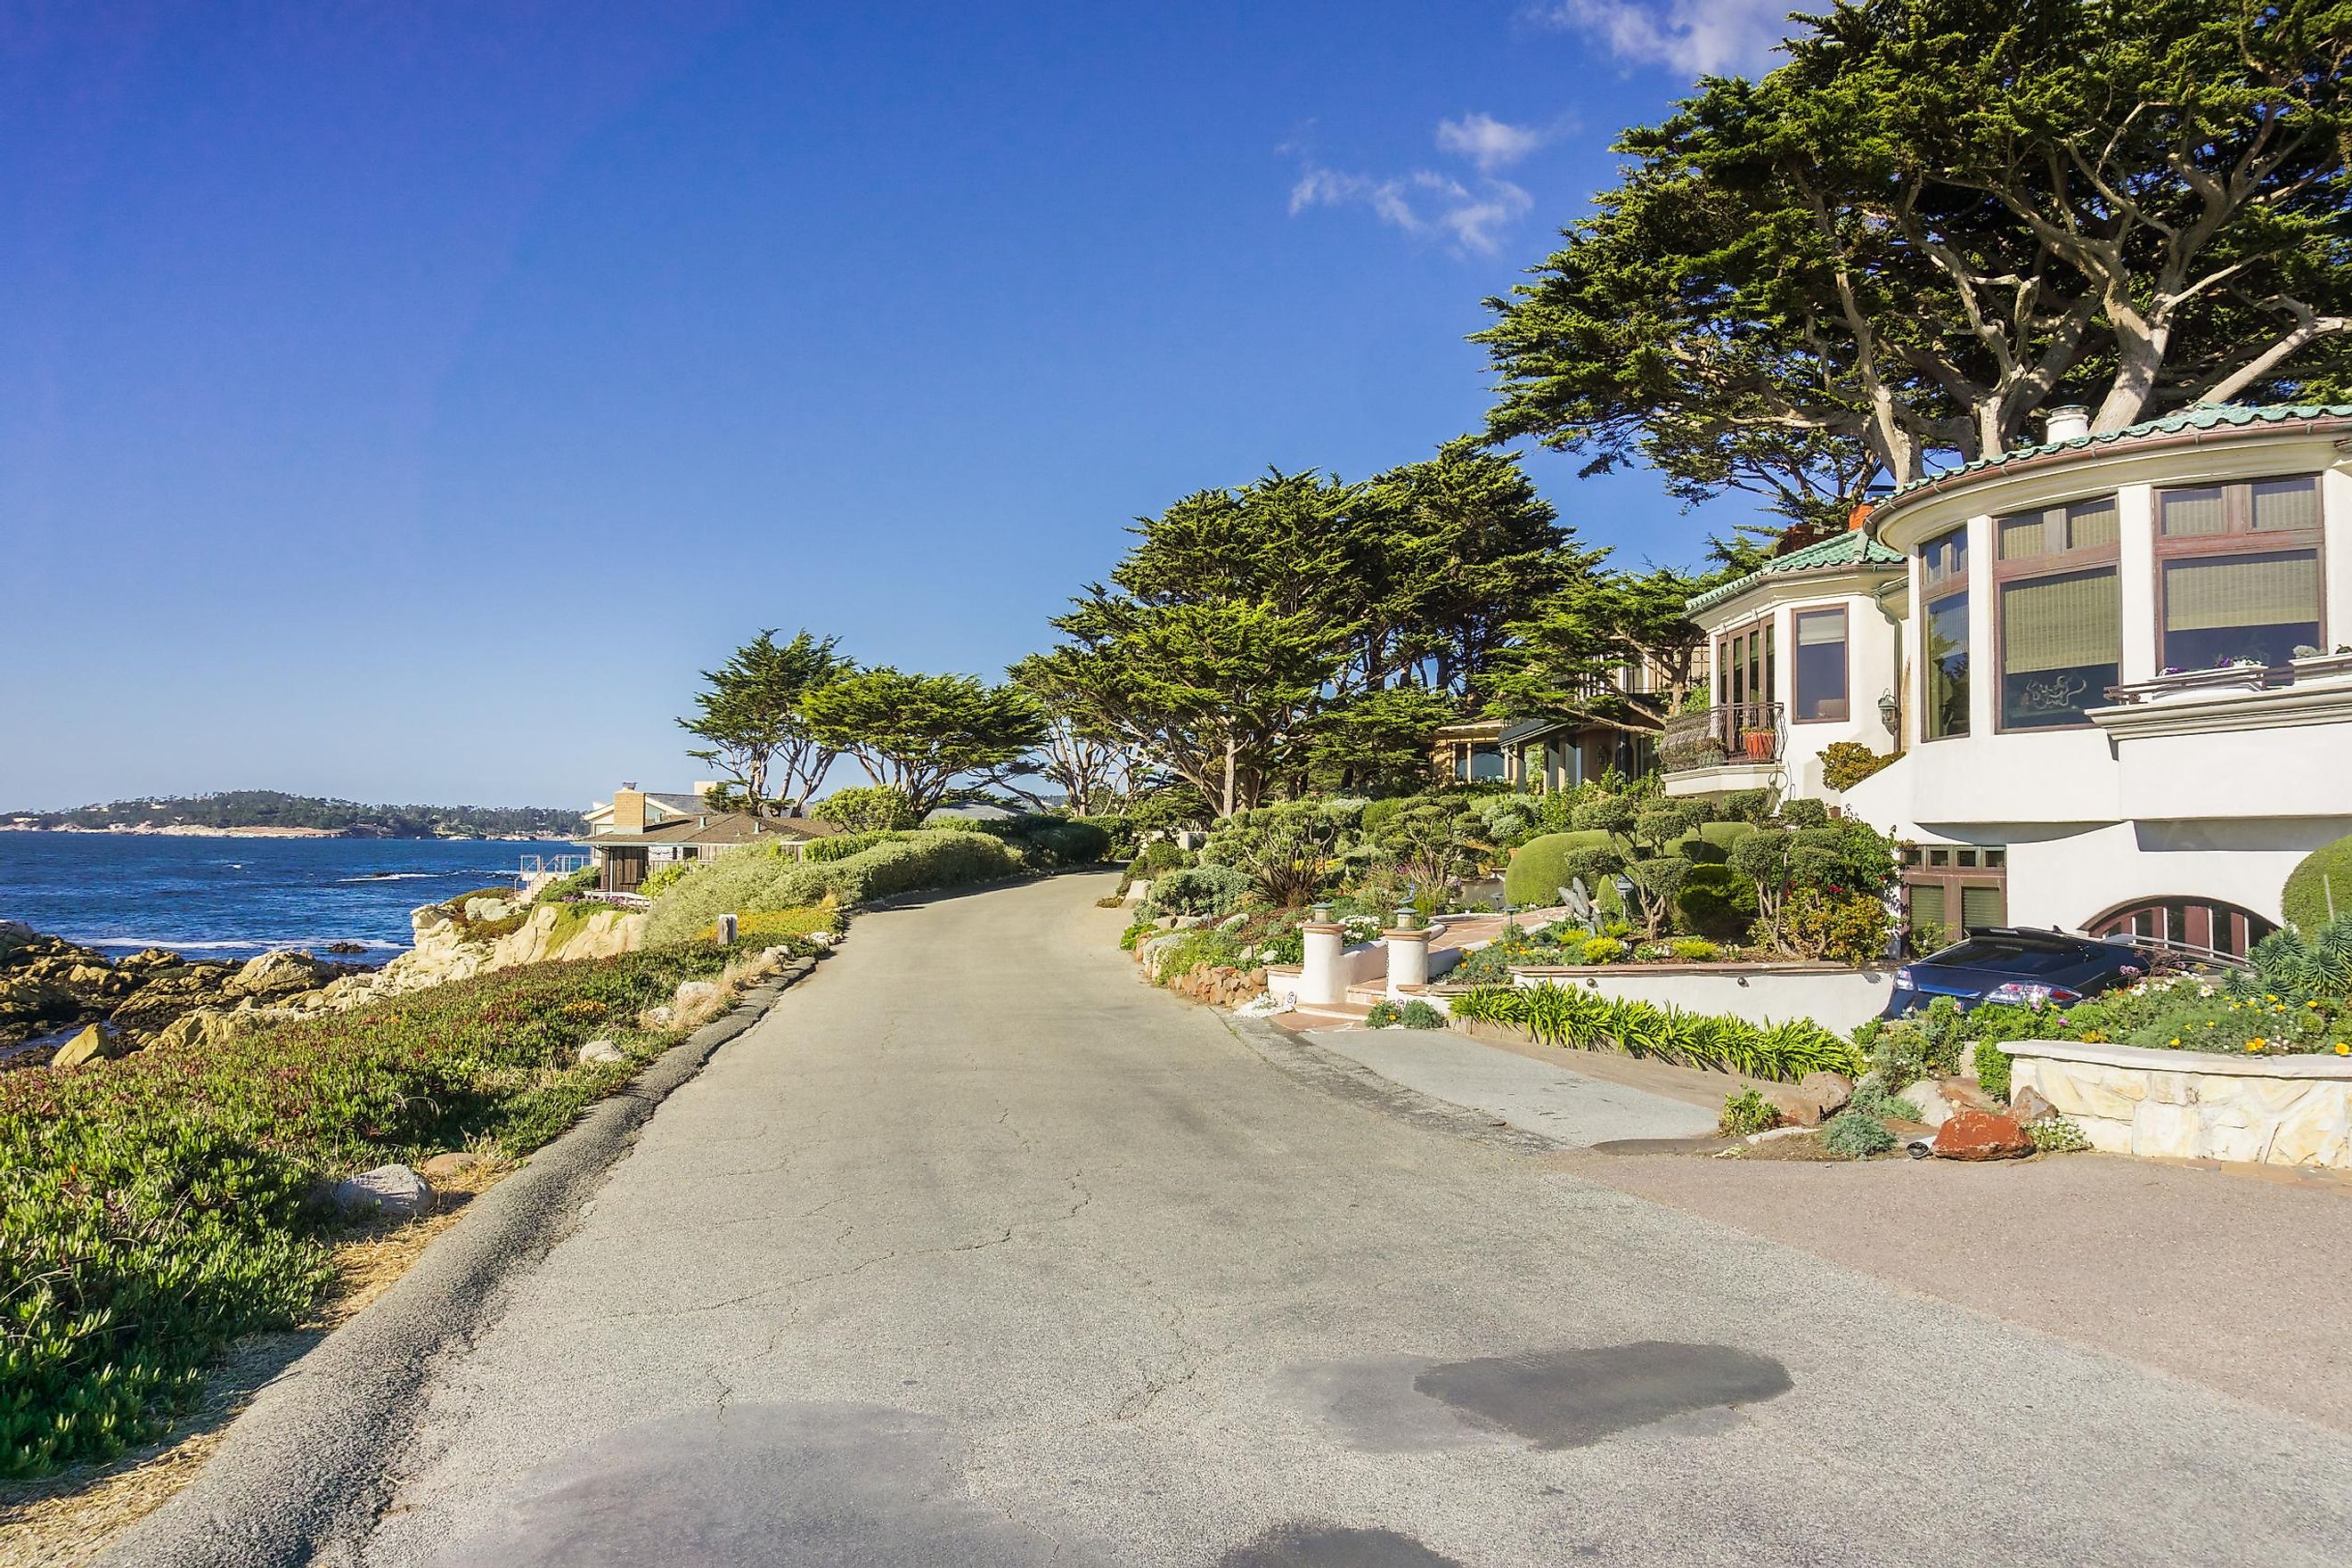 Driving on the Pacific Ocean coast, in Carmel-by-the-sea, Monterey Peninsula, California